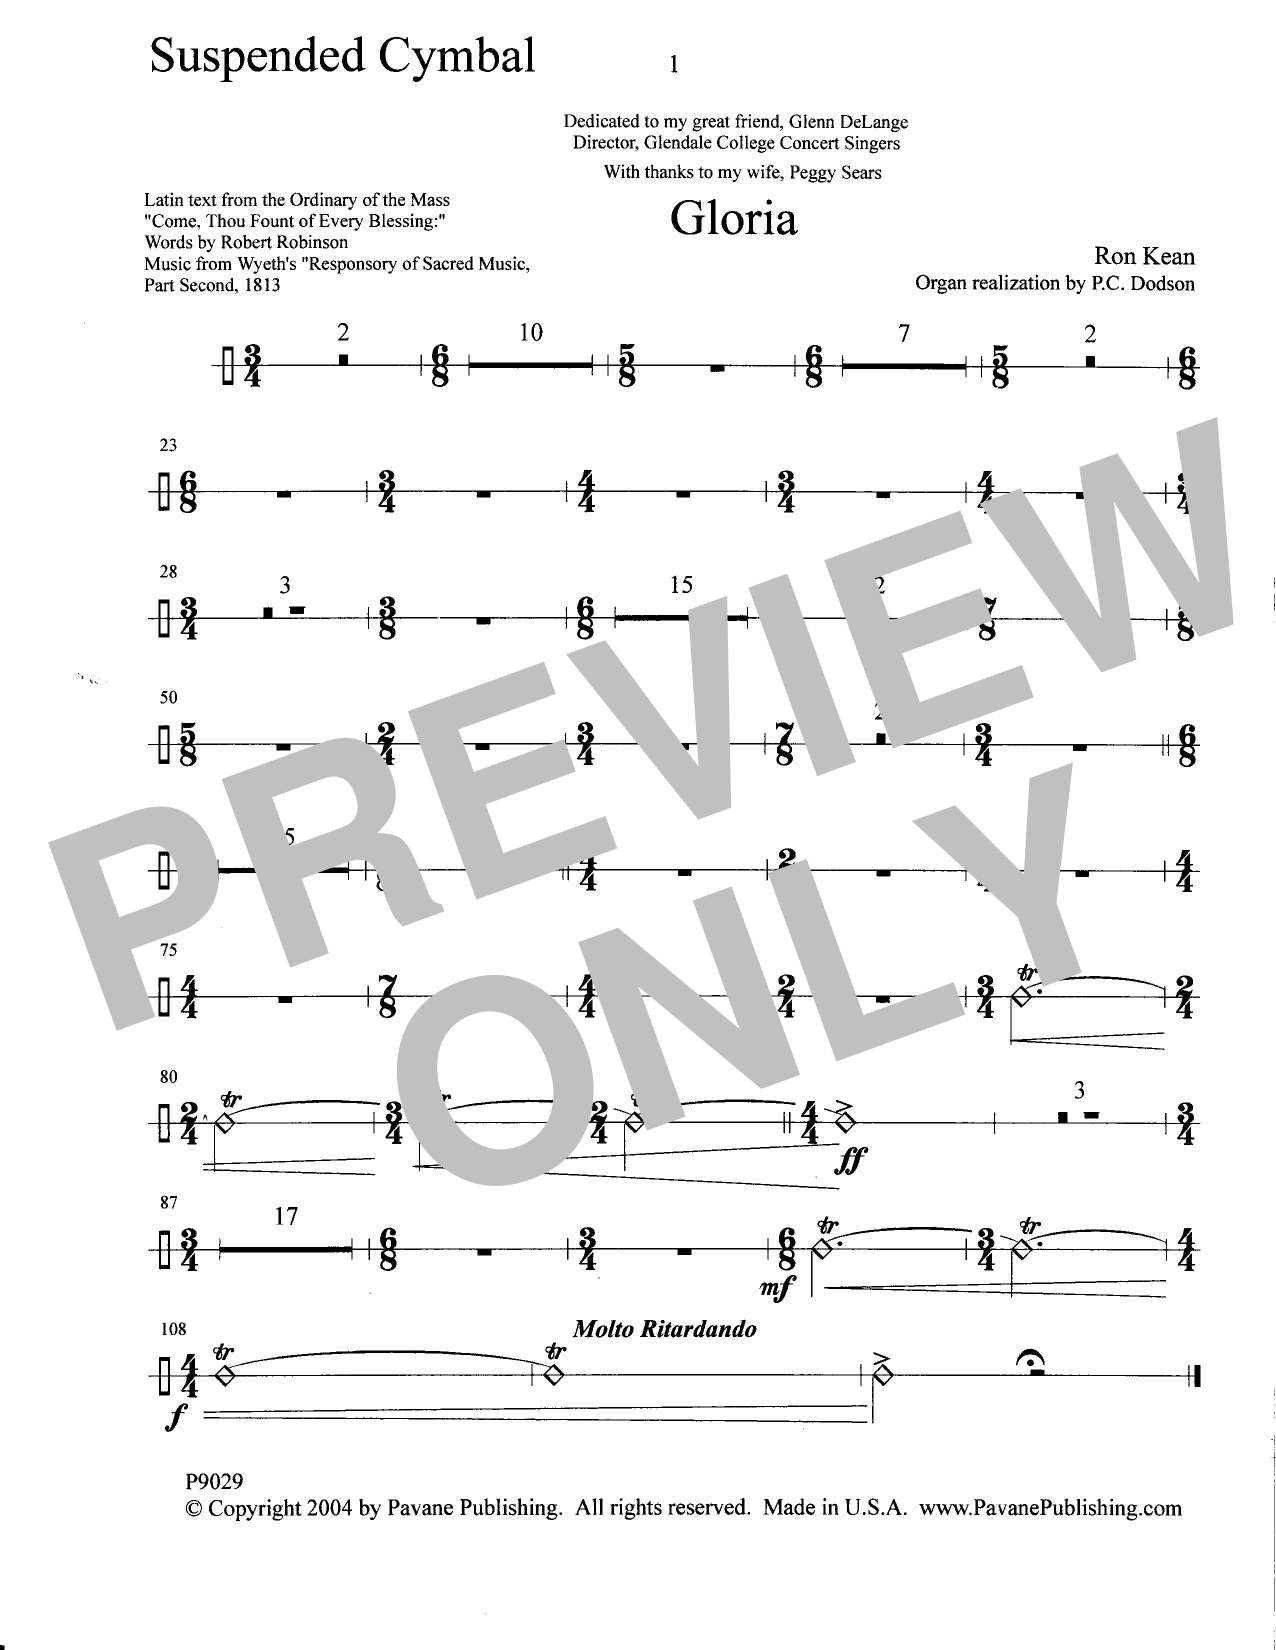 Download Ron Kean Gloria - Suspended Cymbal Sheet Music